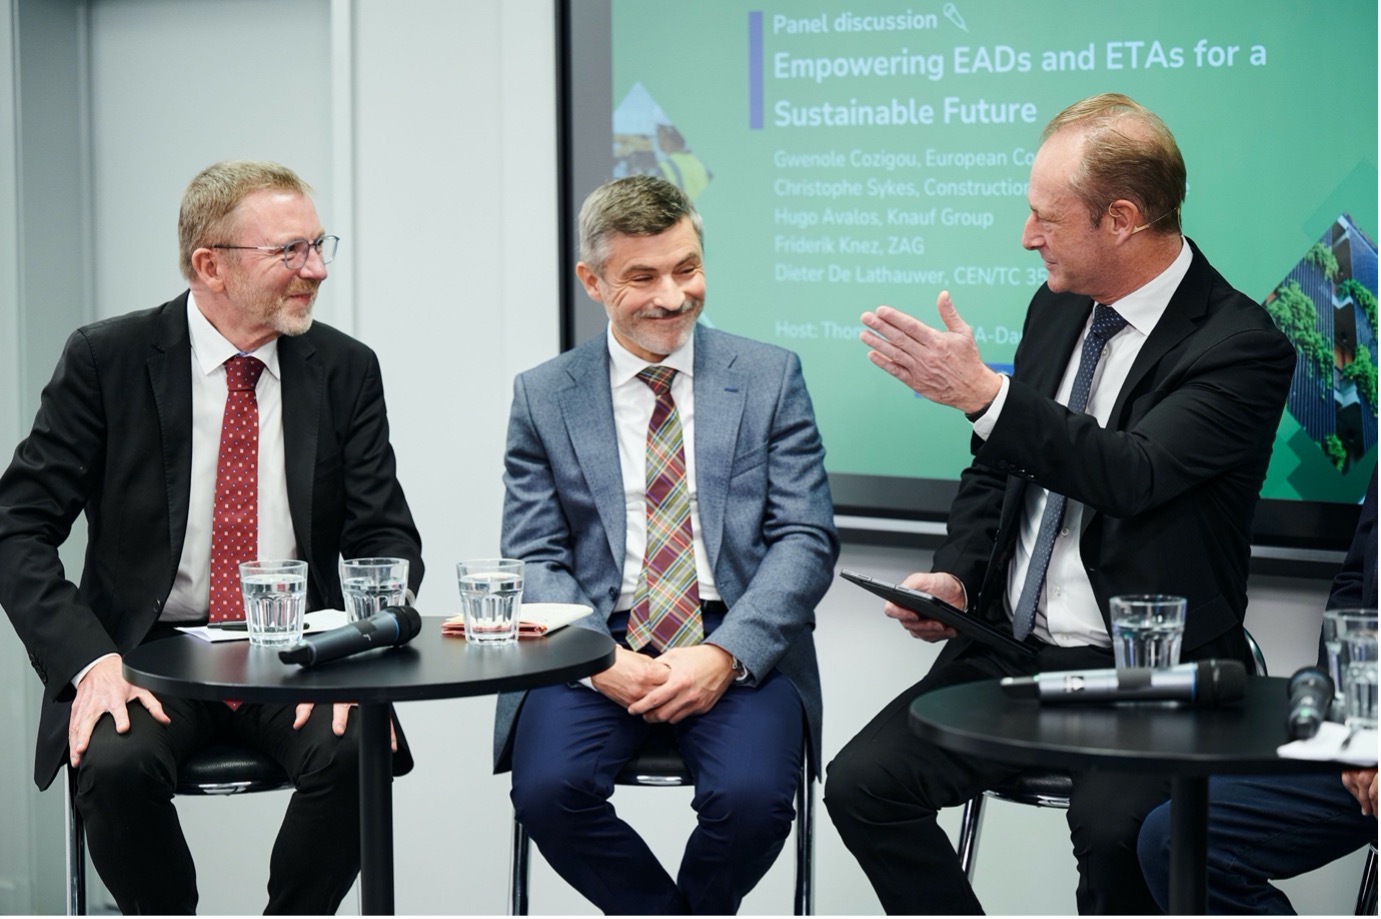 Director Gwenole Cozigou from the European Commission (left), Christophe Sykes, Director General of Construction Products Europe (middle) and host Thomas Bruun (ETA-Danmark, right) engaged in the discussion.